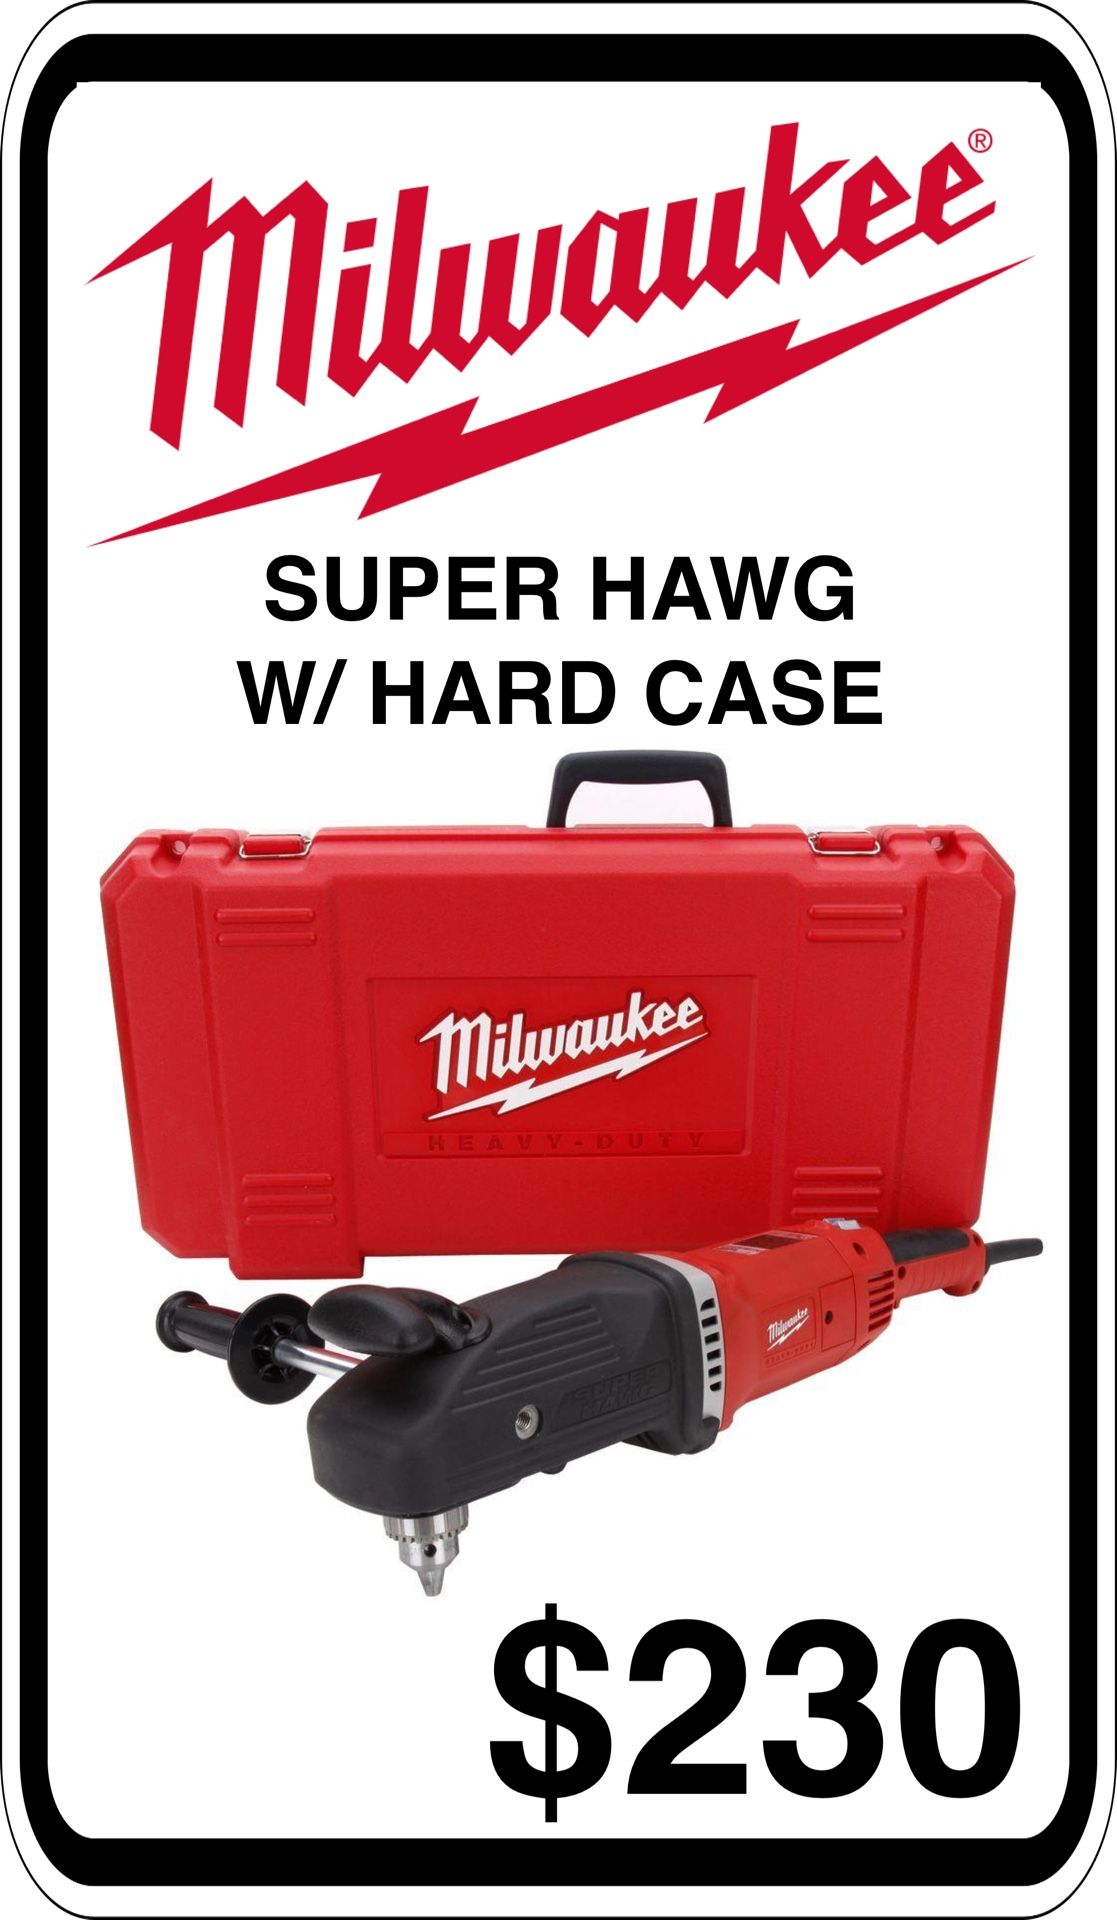 BRAND NEW - Milwaukee Super Hole Hawg - We accept trades & Credit Cards - AzBE Deals